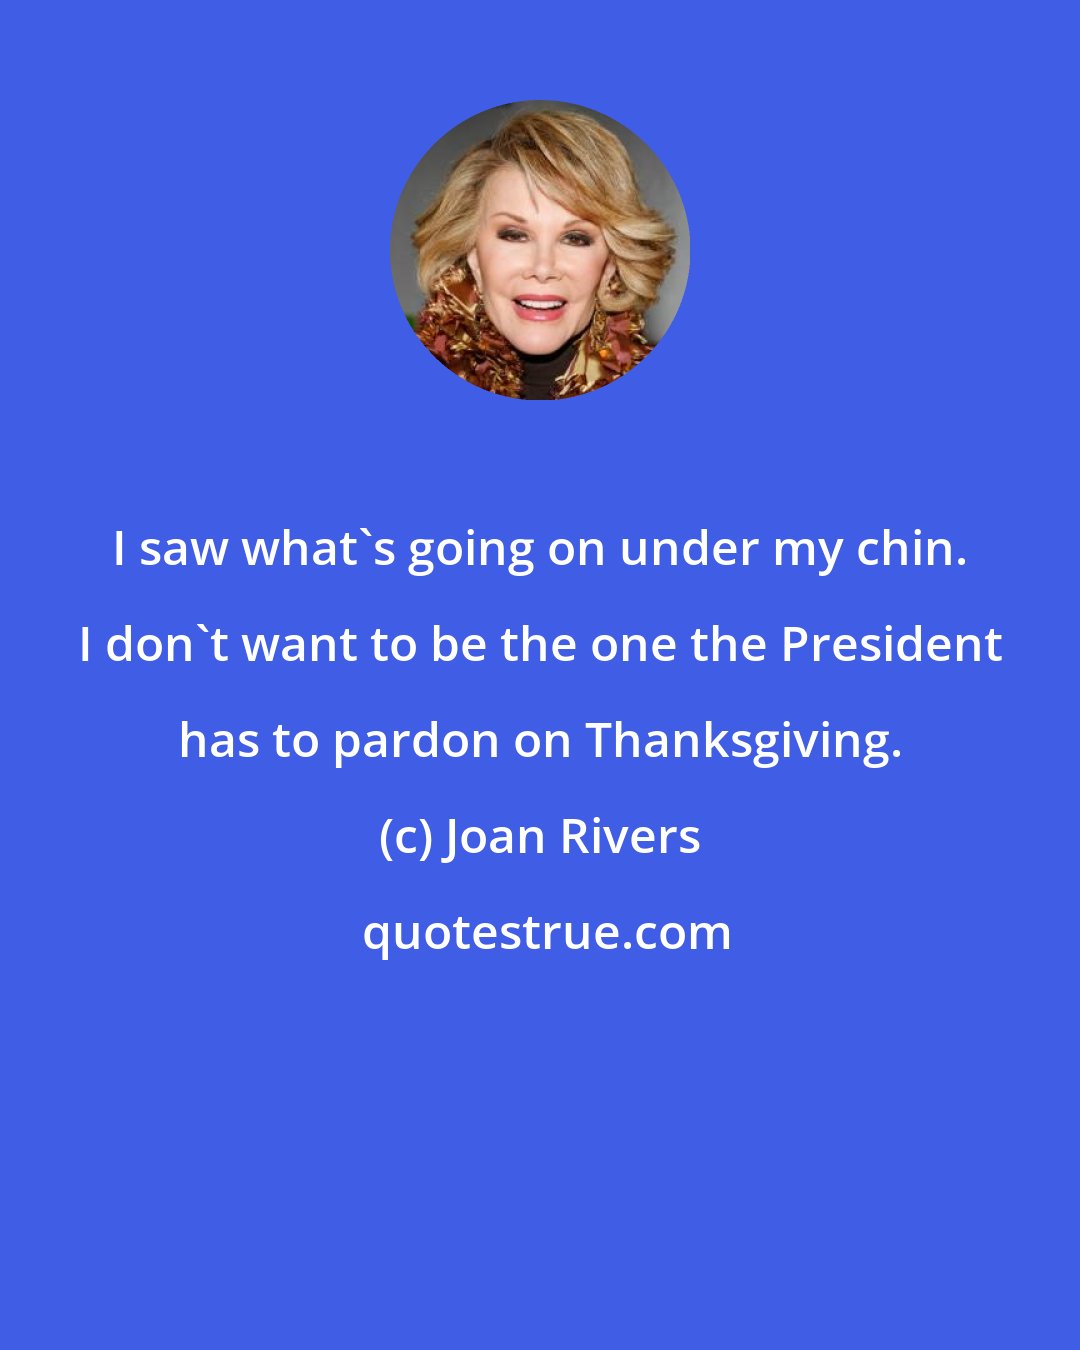 Joan Rivers: I saw what's going on under my chin. I don't want to be the one the President has to pardon on Thanksgiving.